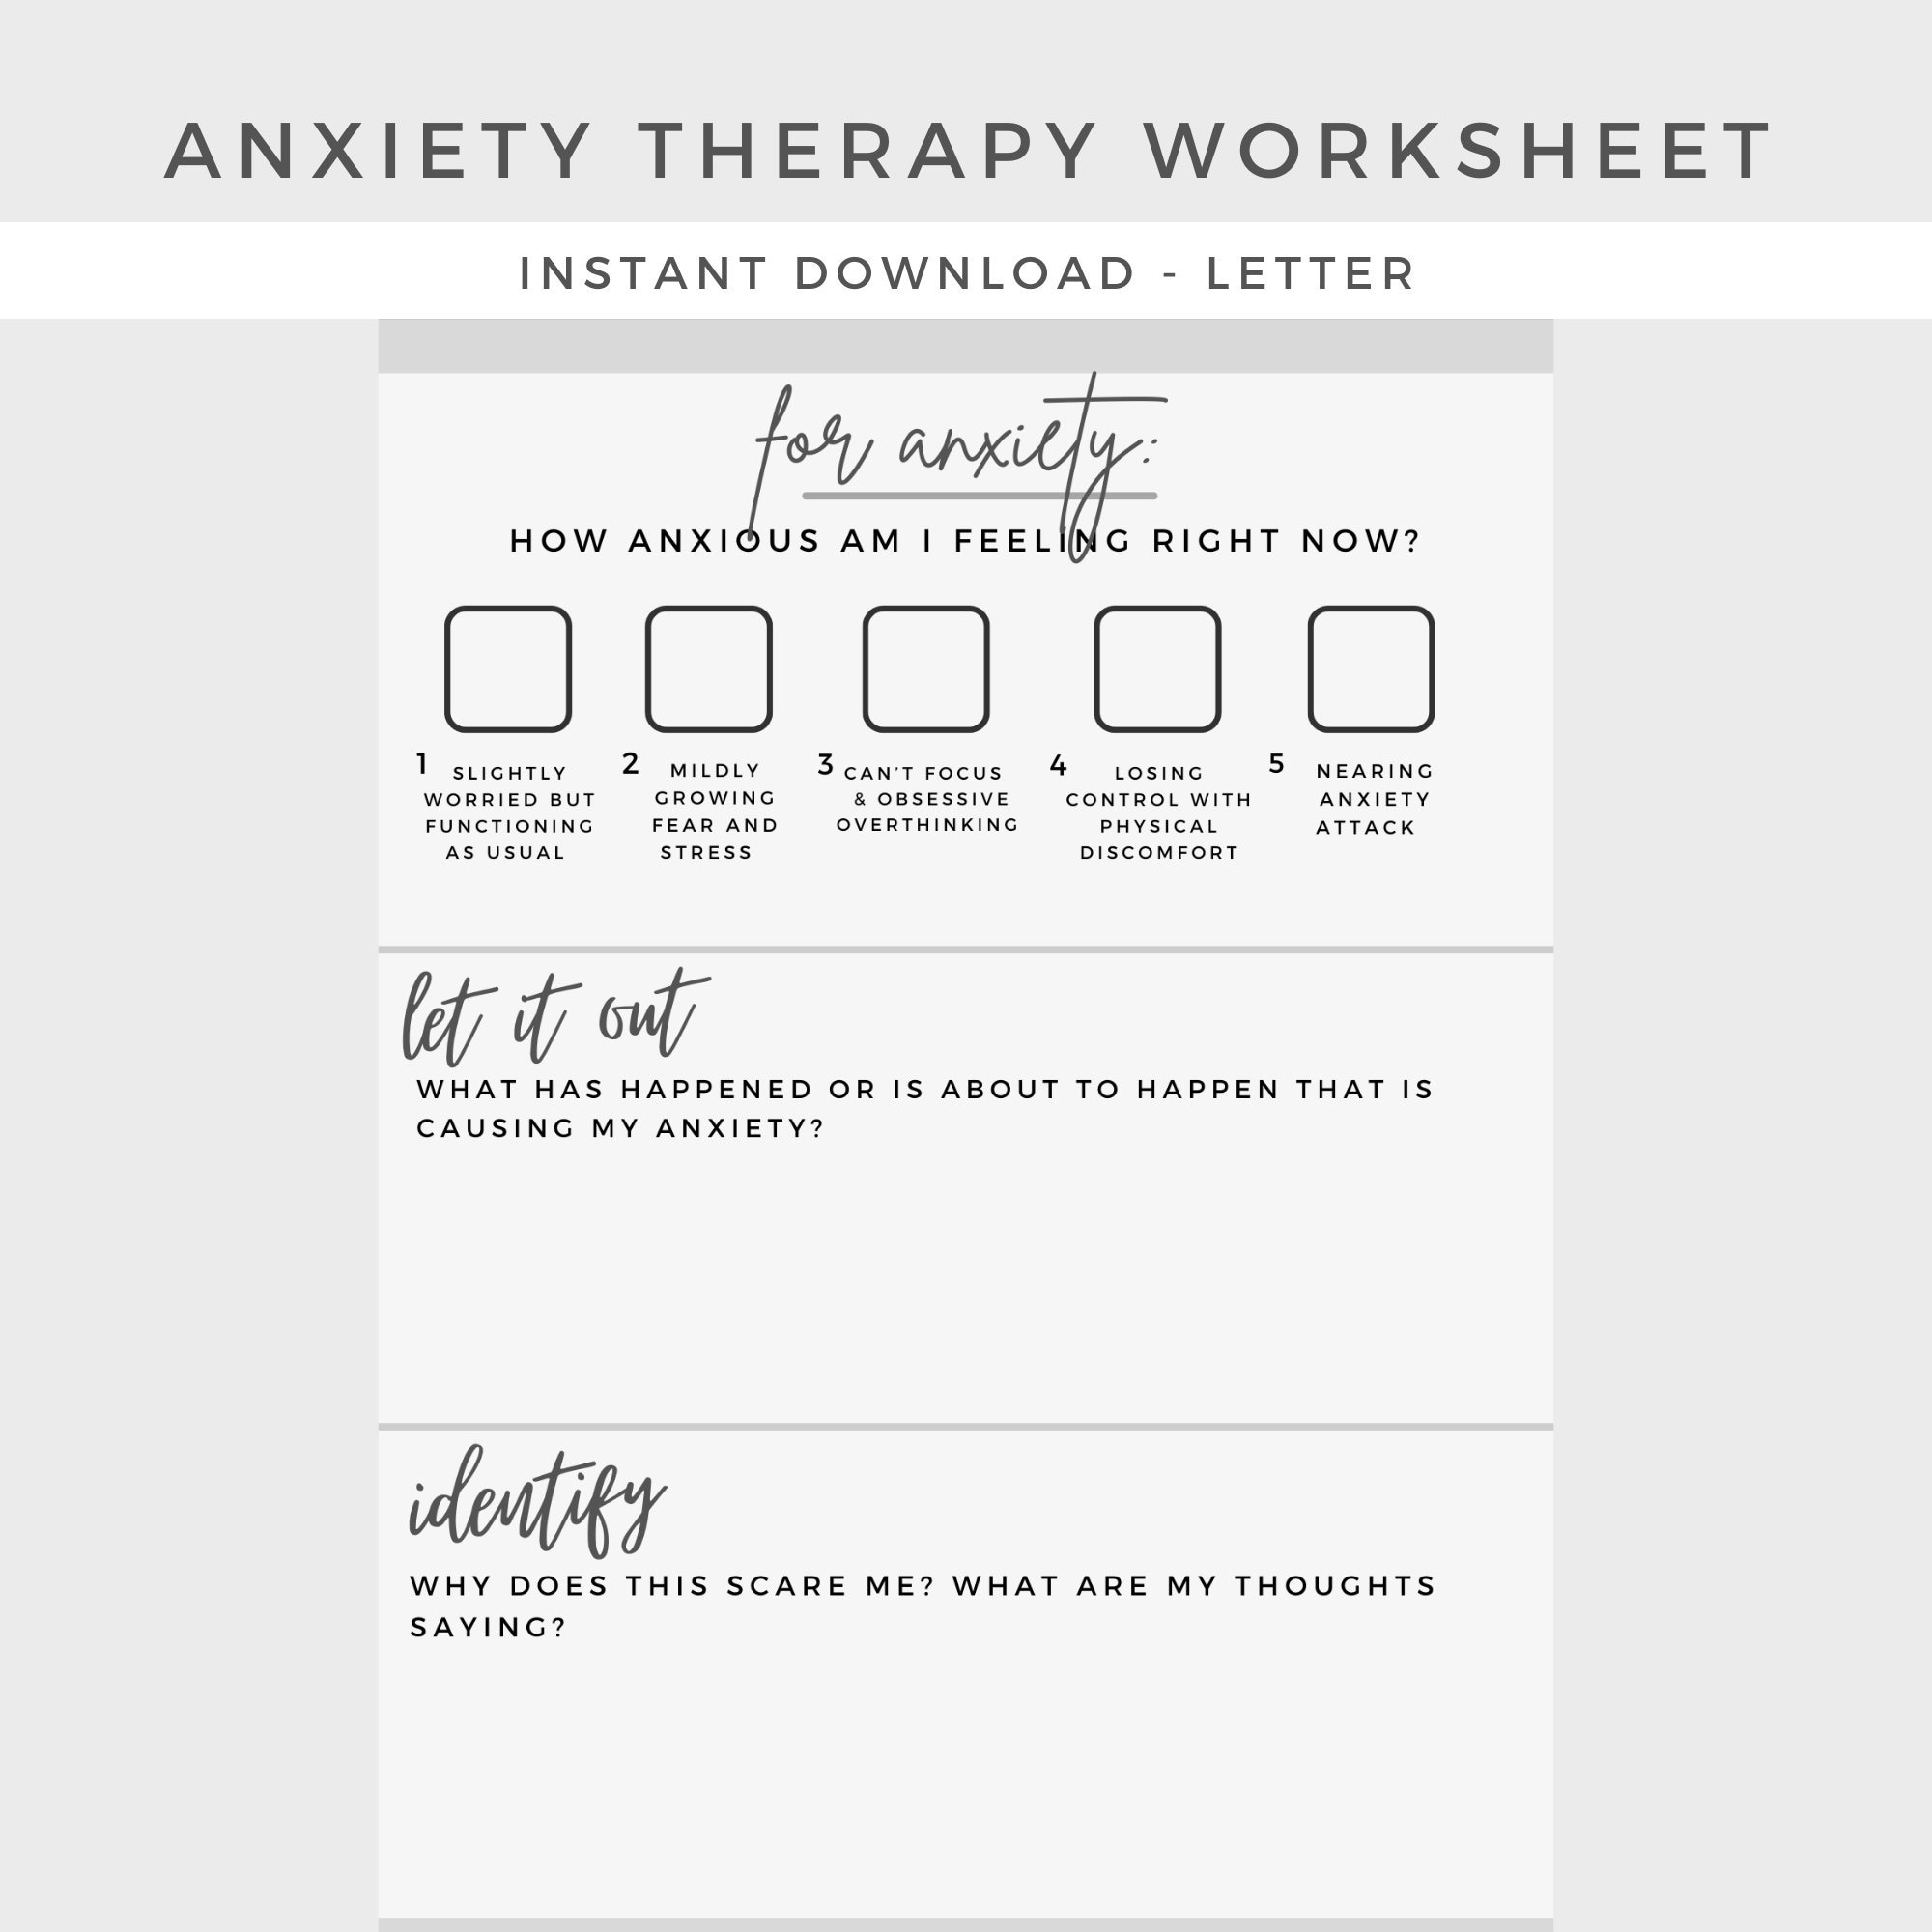 Anxiety Therapy Worksheet Mental Health Depression Anxiety Therapy Journal Home Management Counseling Binder Planner Printable Etsy